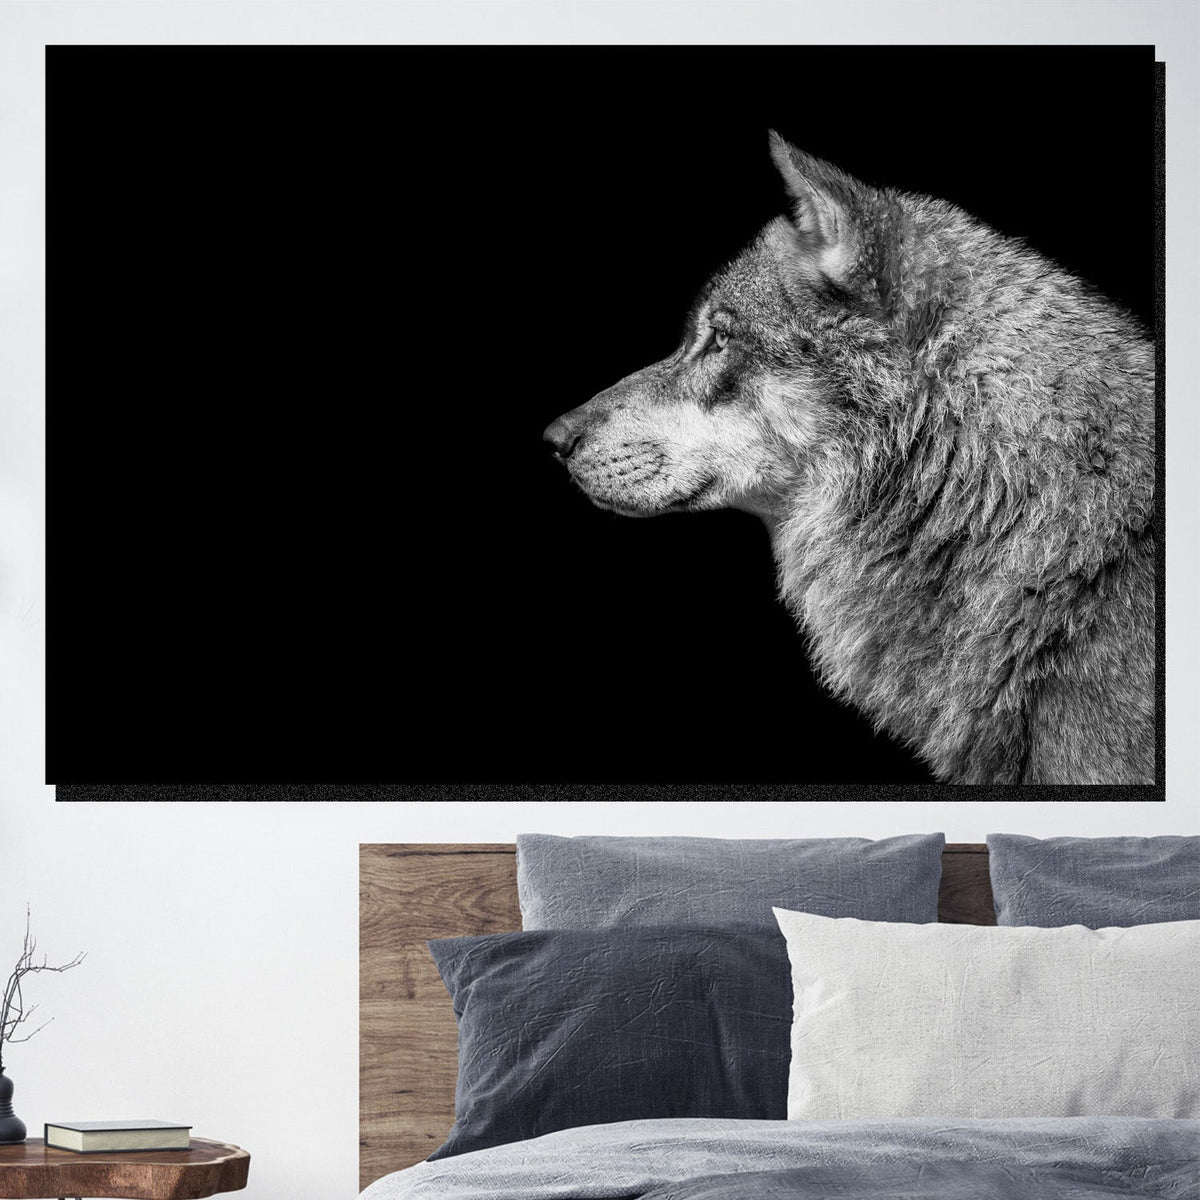 https://cdn.shopify.com/s/files/1/0387/9986/8044/products/WolfSideViewCanvasArtprintStretched-2.jpg